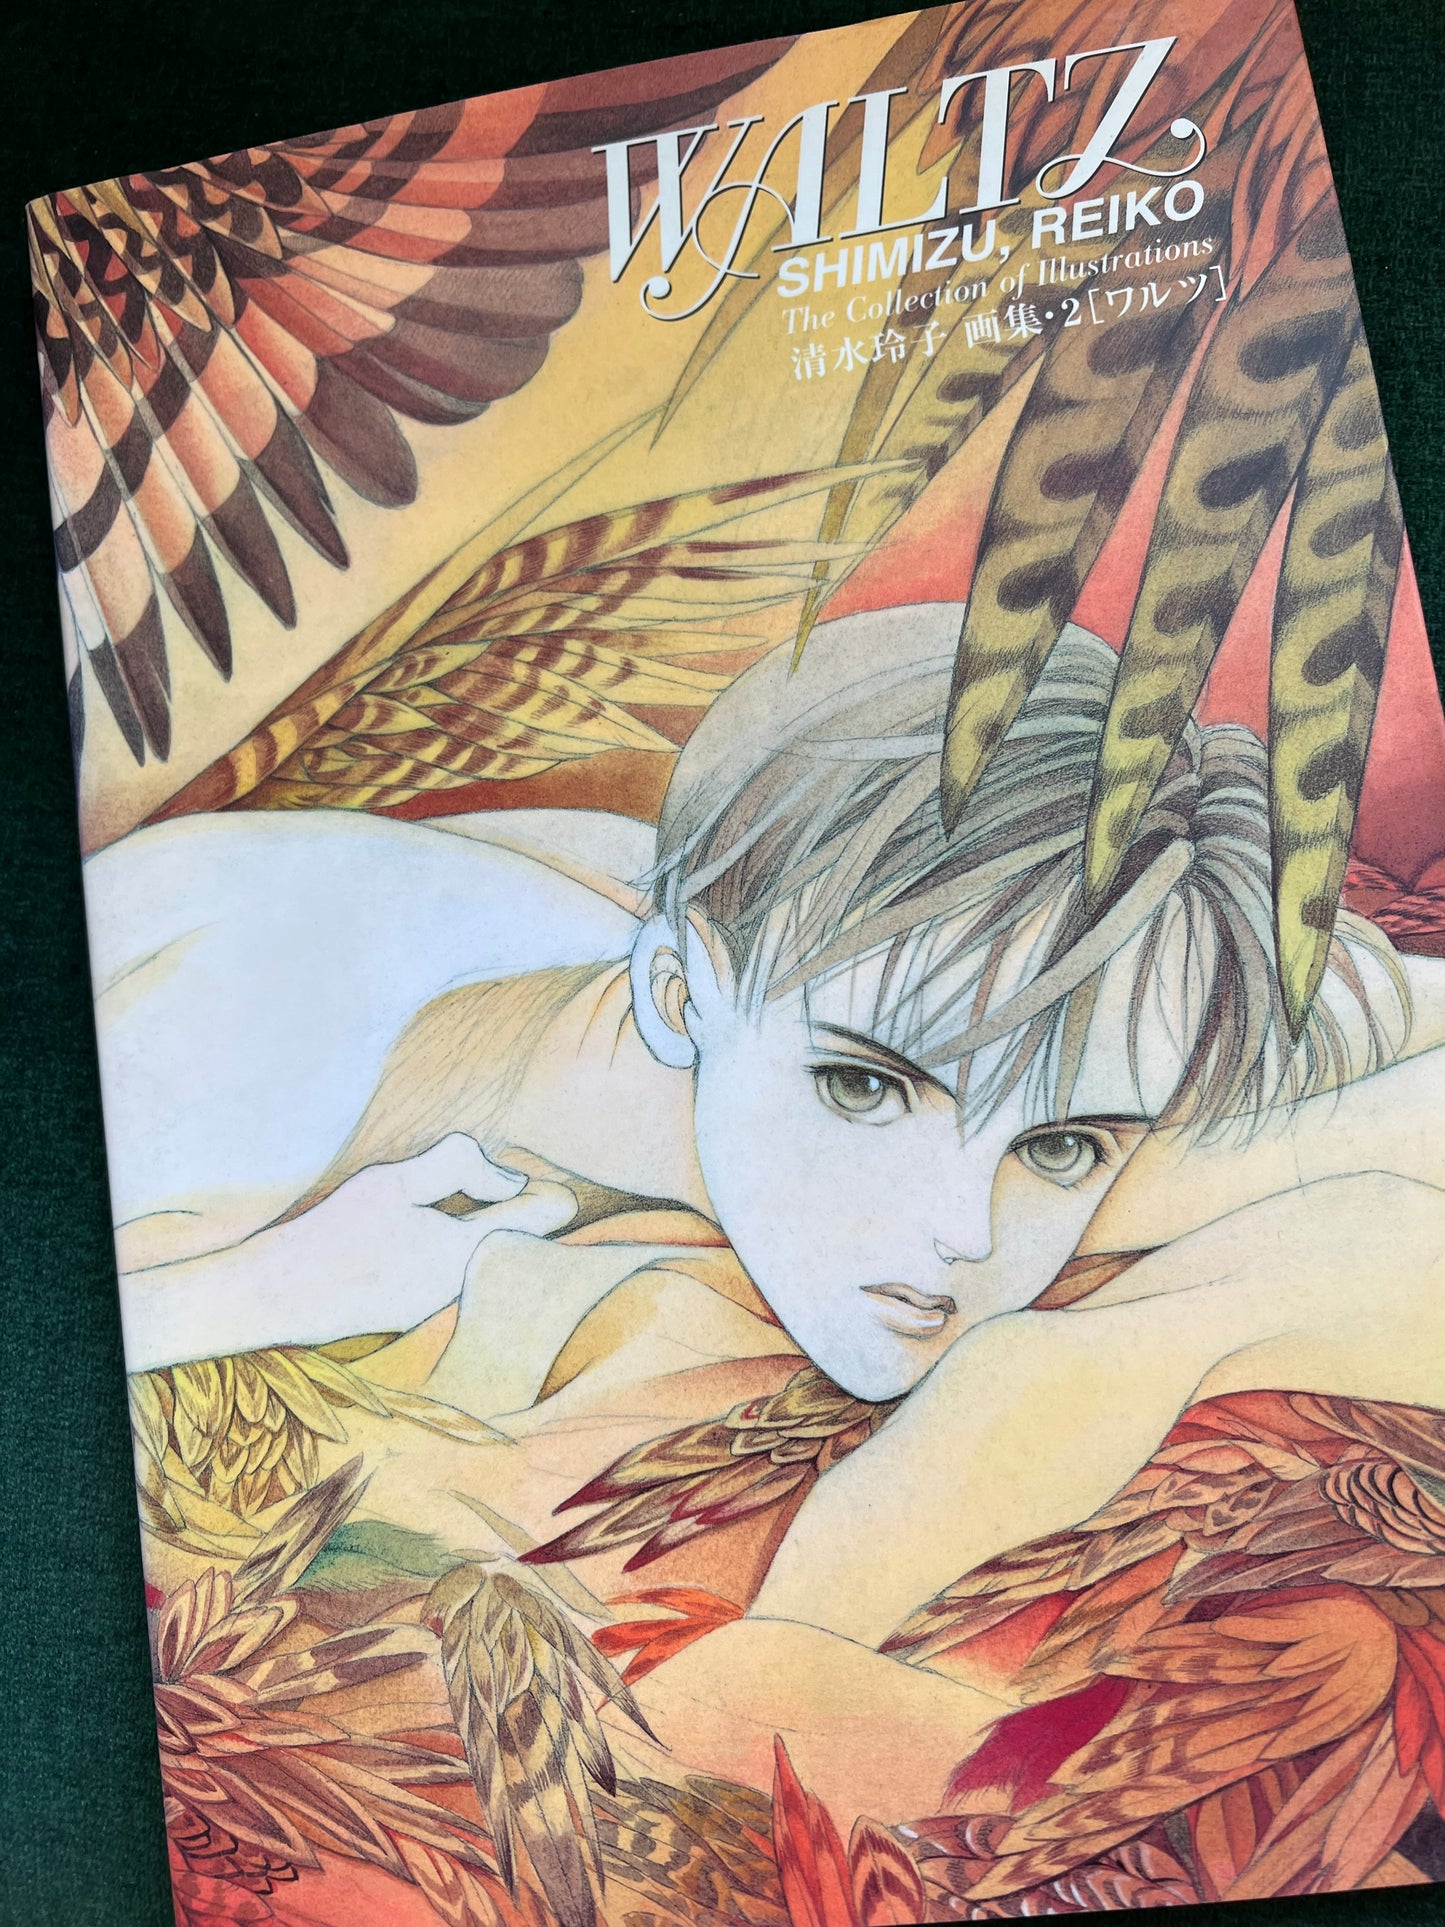 “Waltz” by Shimizu, Reiko: The Collection of illustrations Artbook